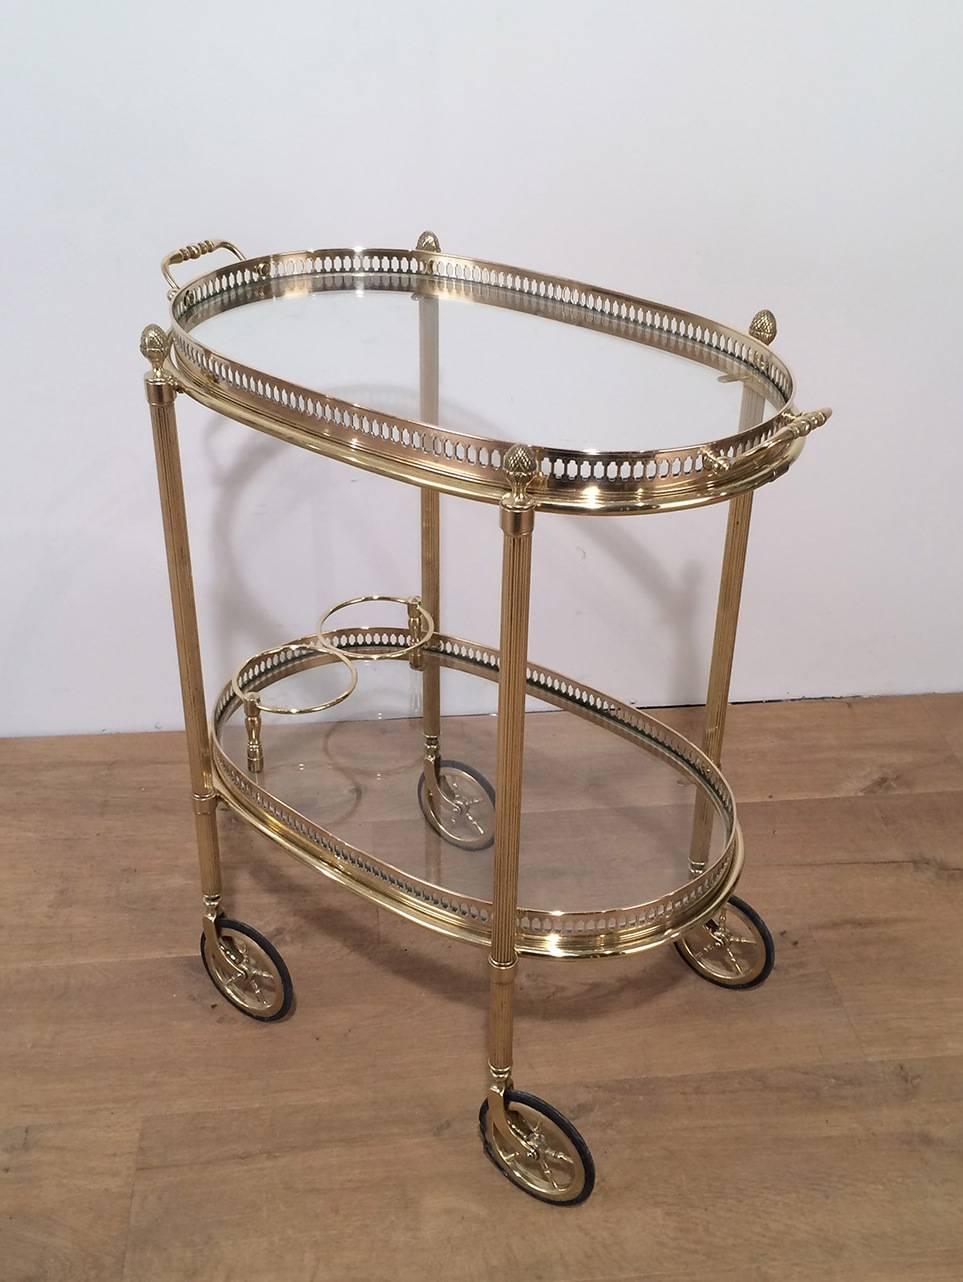 Oval brass bar cart with removable trays.

This piece is currently in France. Please allow us 2 to 4 weeks for delivery. Price includes delivery to our warehouse in Long Island City, NY.